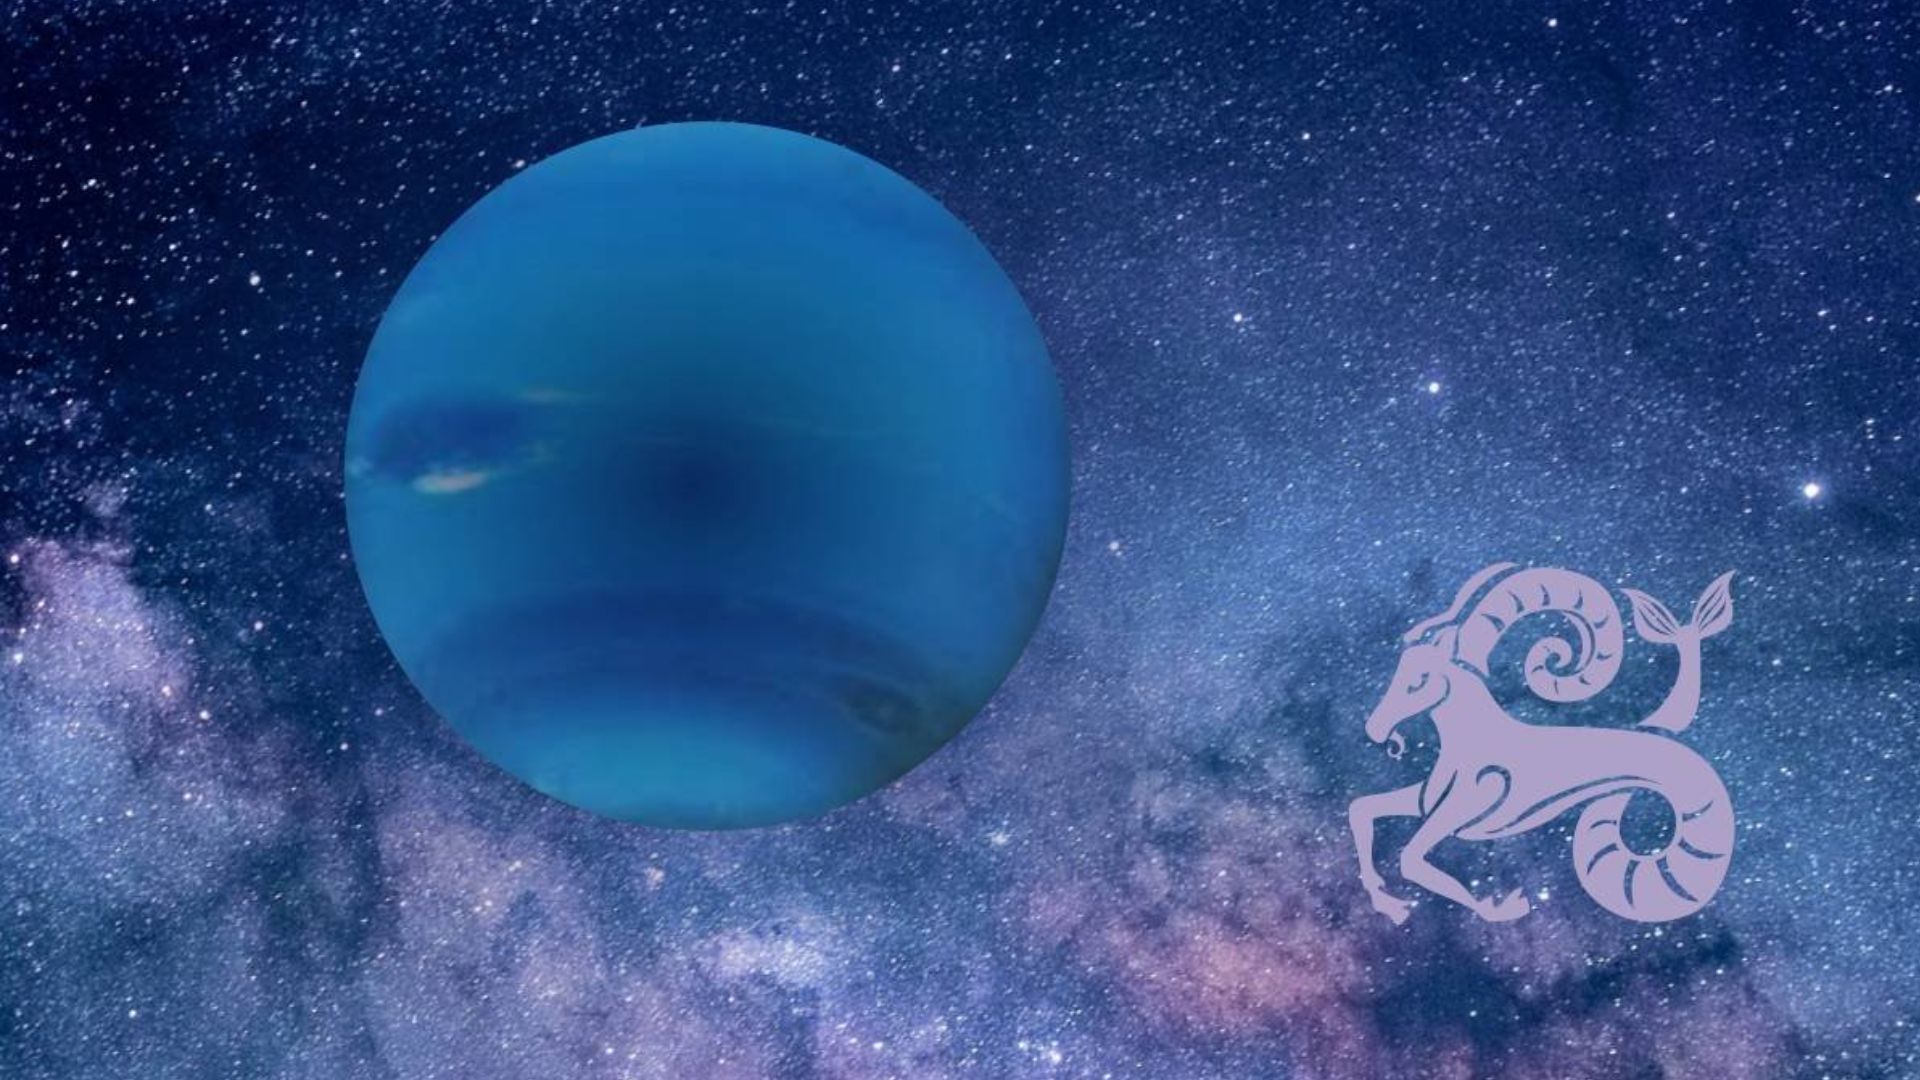 Caprion Zodiac Sign And Planet Neptune